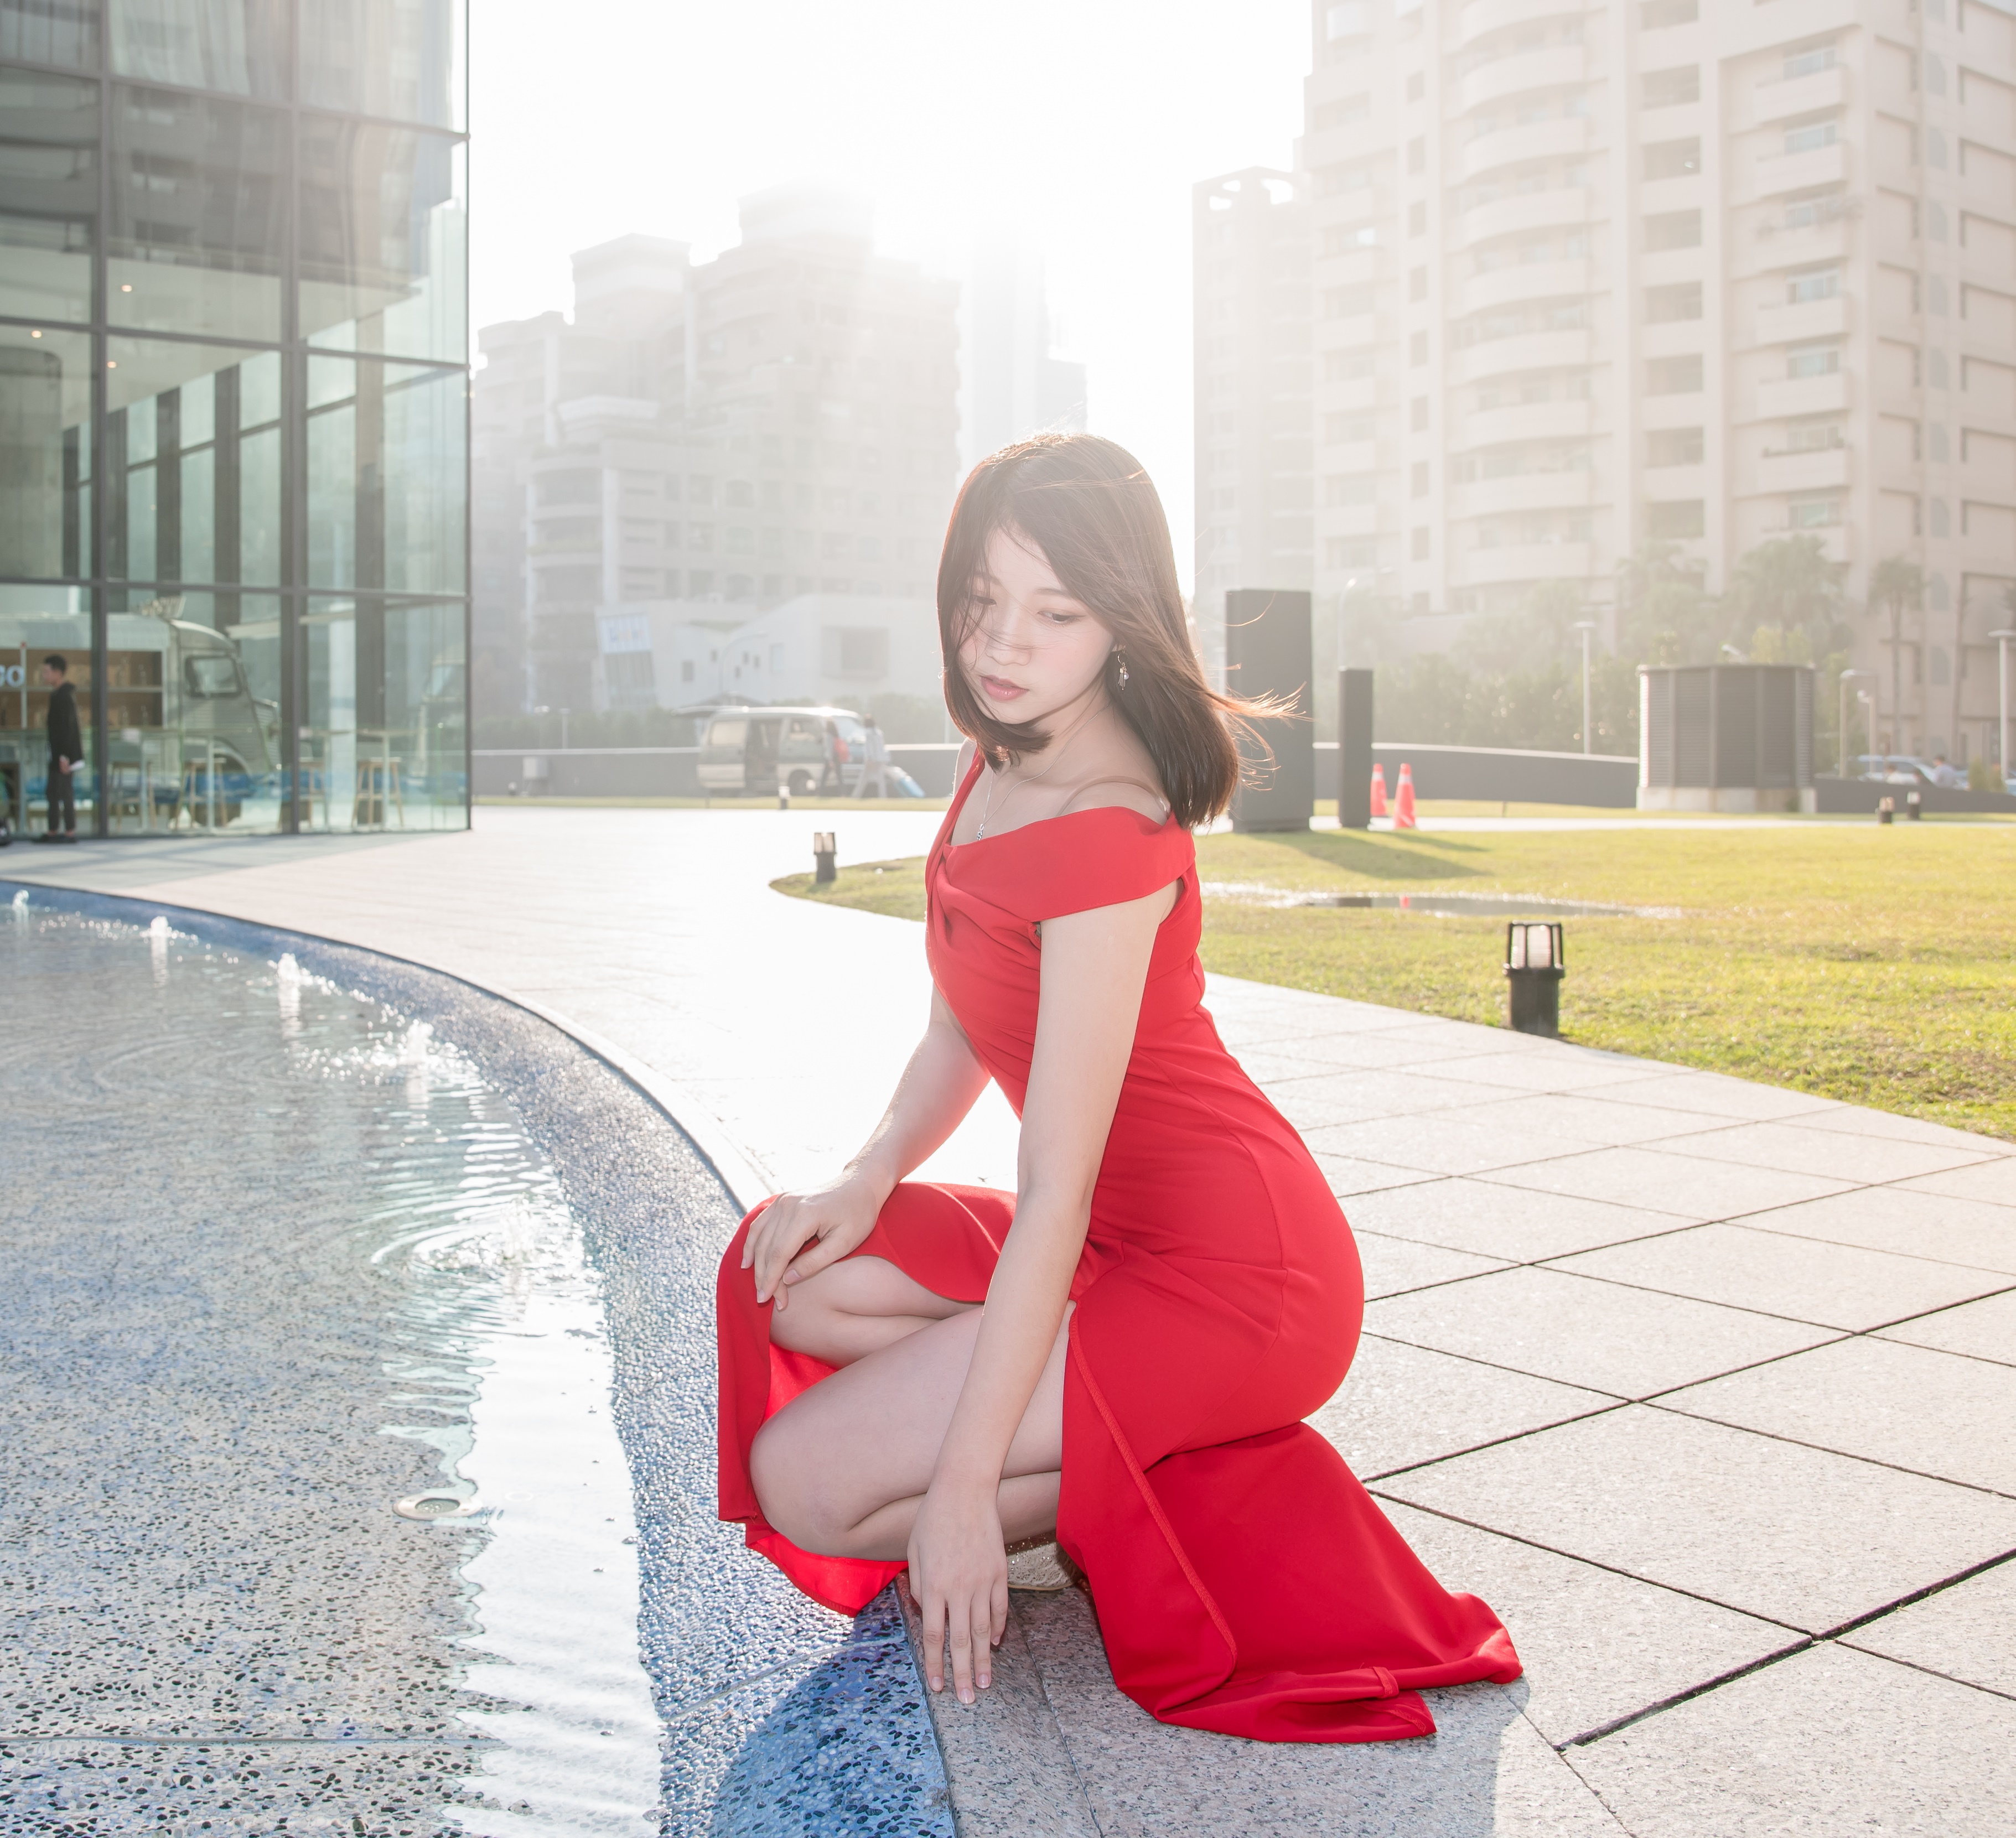 People 3643x3322 Asian women model dark hair red dress hair blowing in the wind dress red clothing legs squatting bare shoulders long hair red lipstick pale sunlight women outdoors outdoors